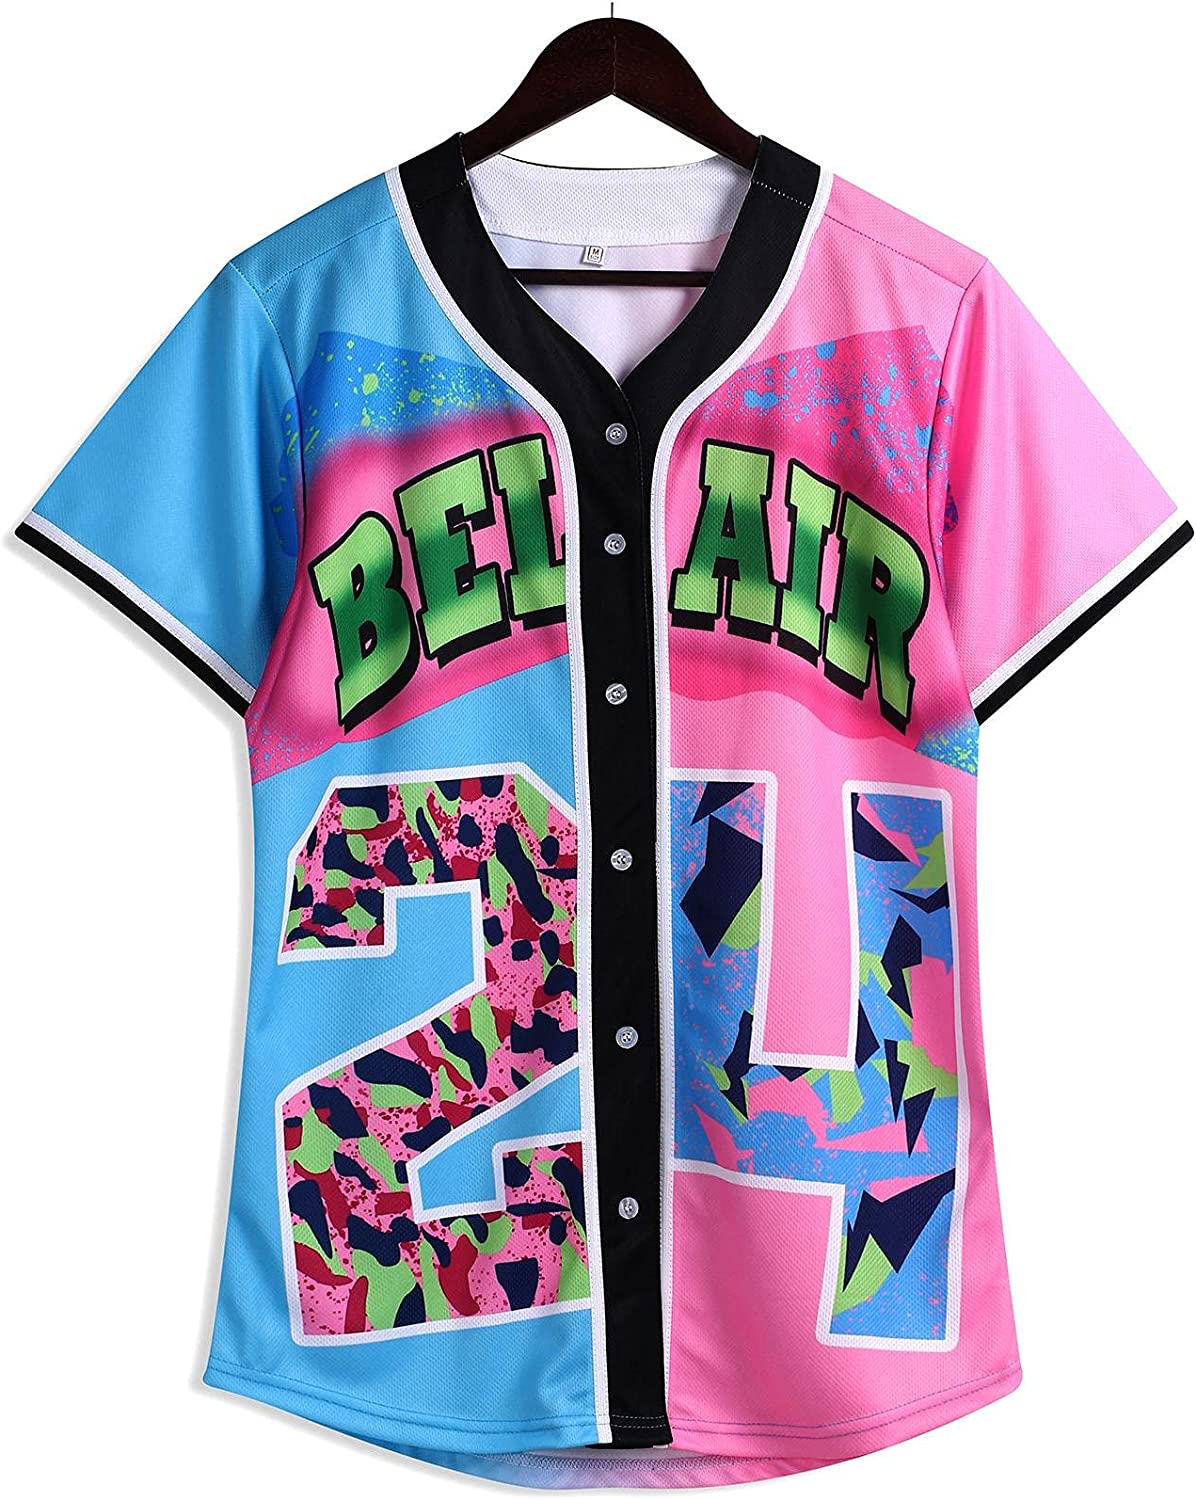 Amzdest 90s Clothing for Women,Unisex Hip Hop Outfit for Party,Bel Air Baseball Jersey,Short Sleeve Button Down Shirt